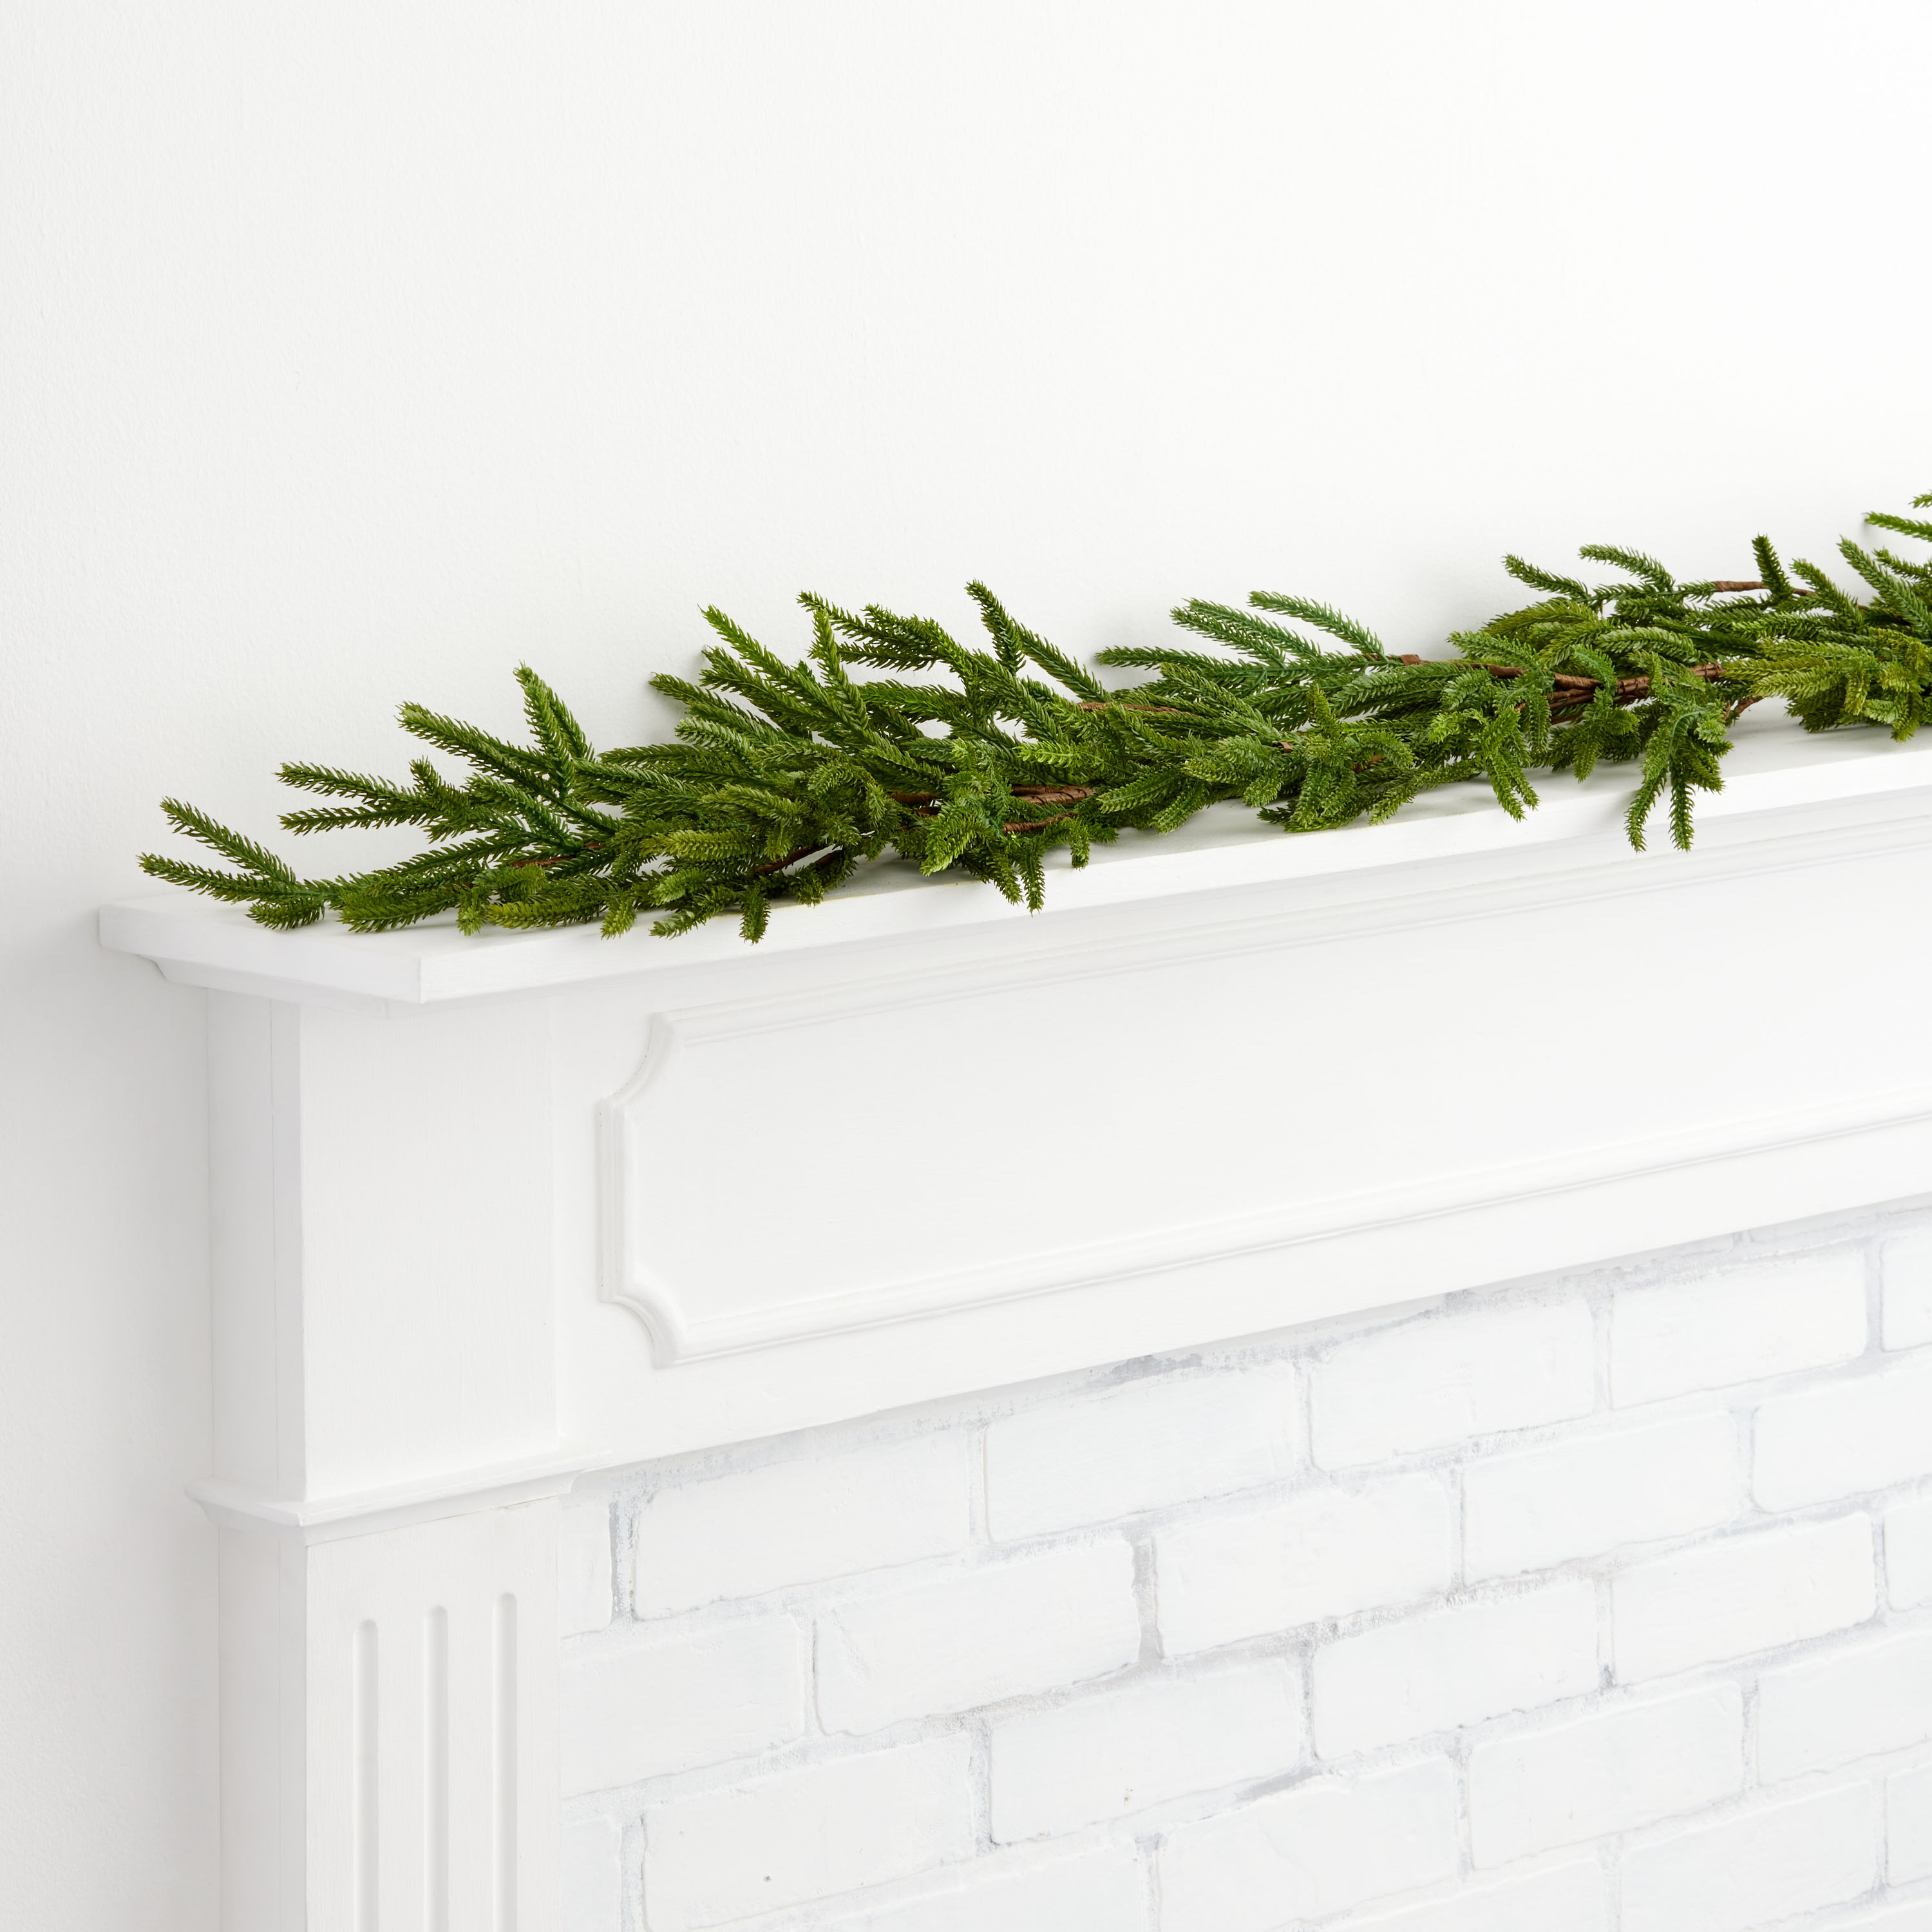 How to Make Faux Garland Look Real - Hello Central Avenue